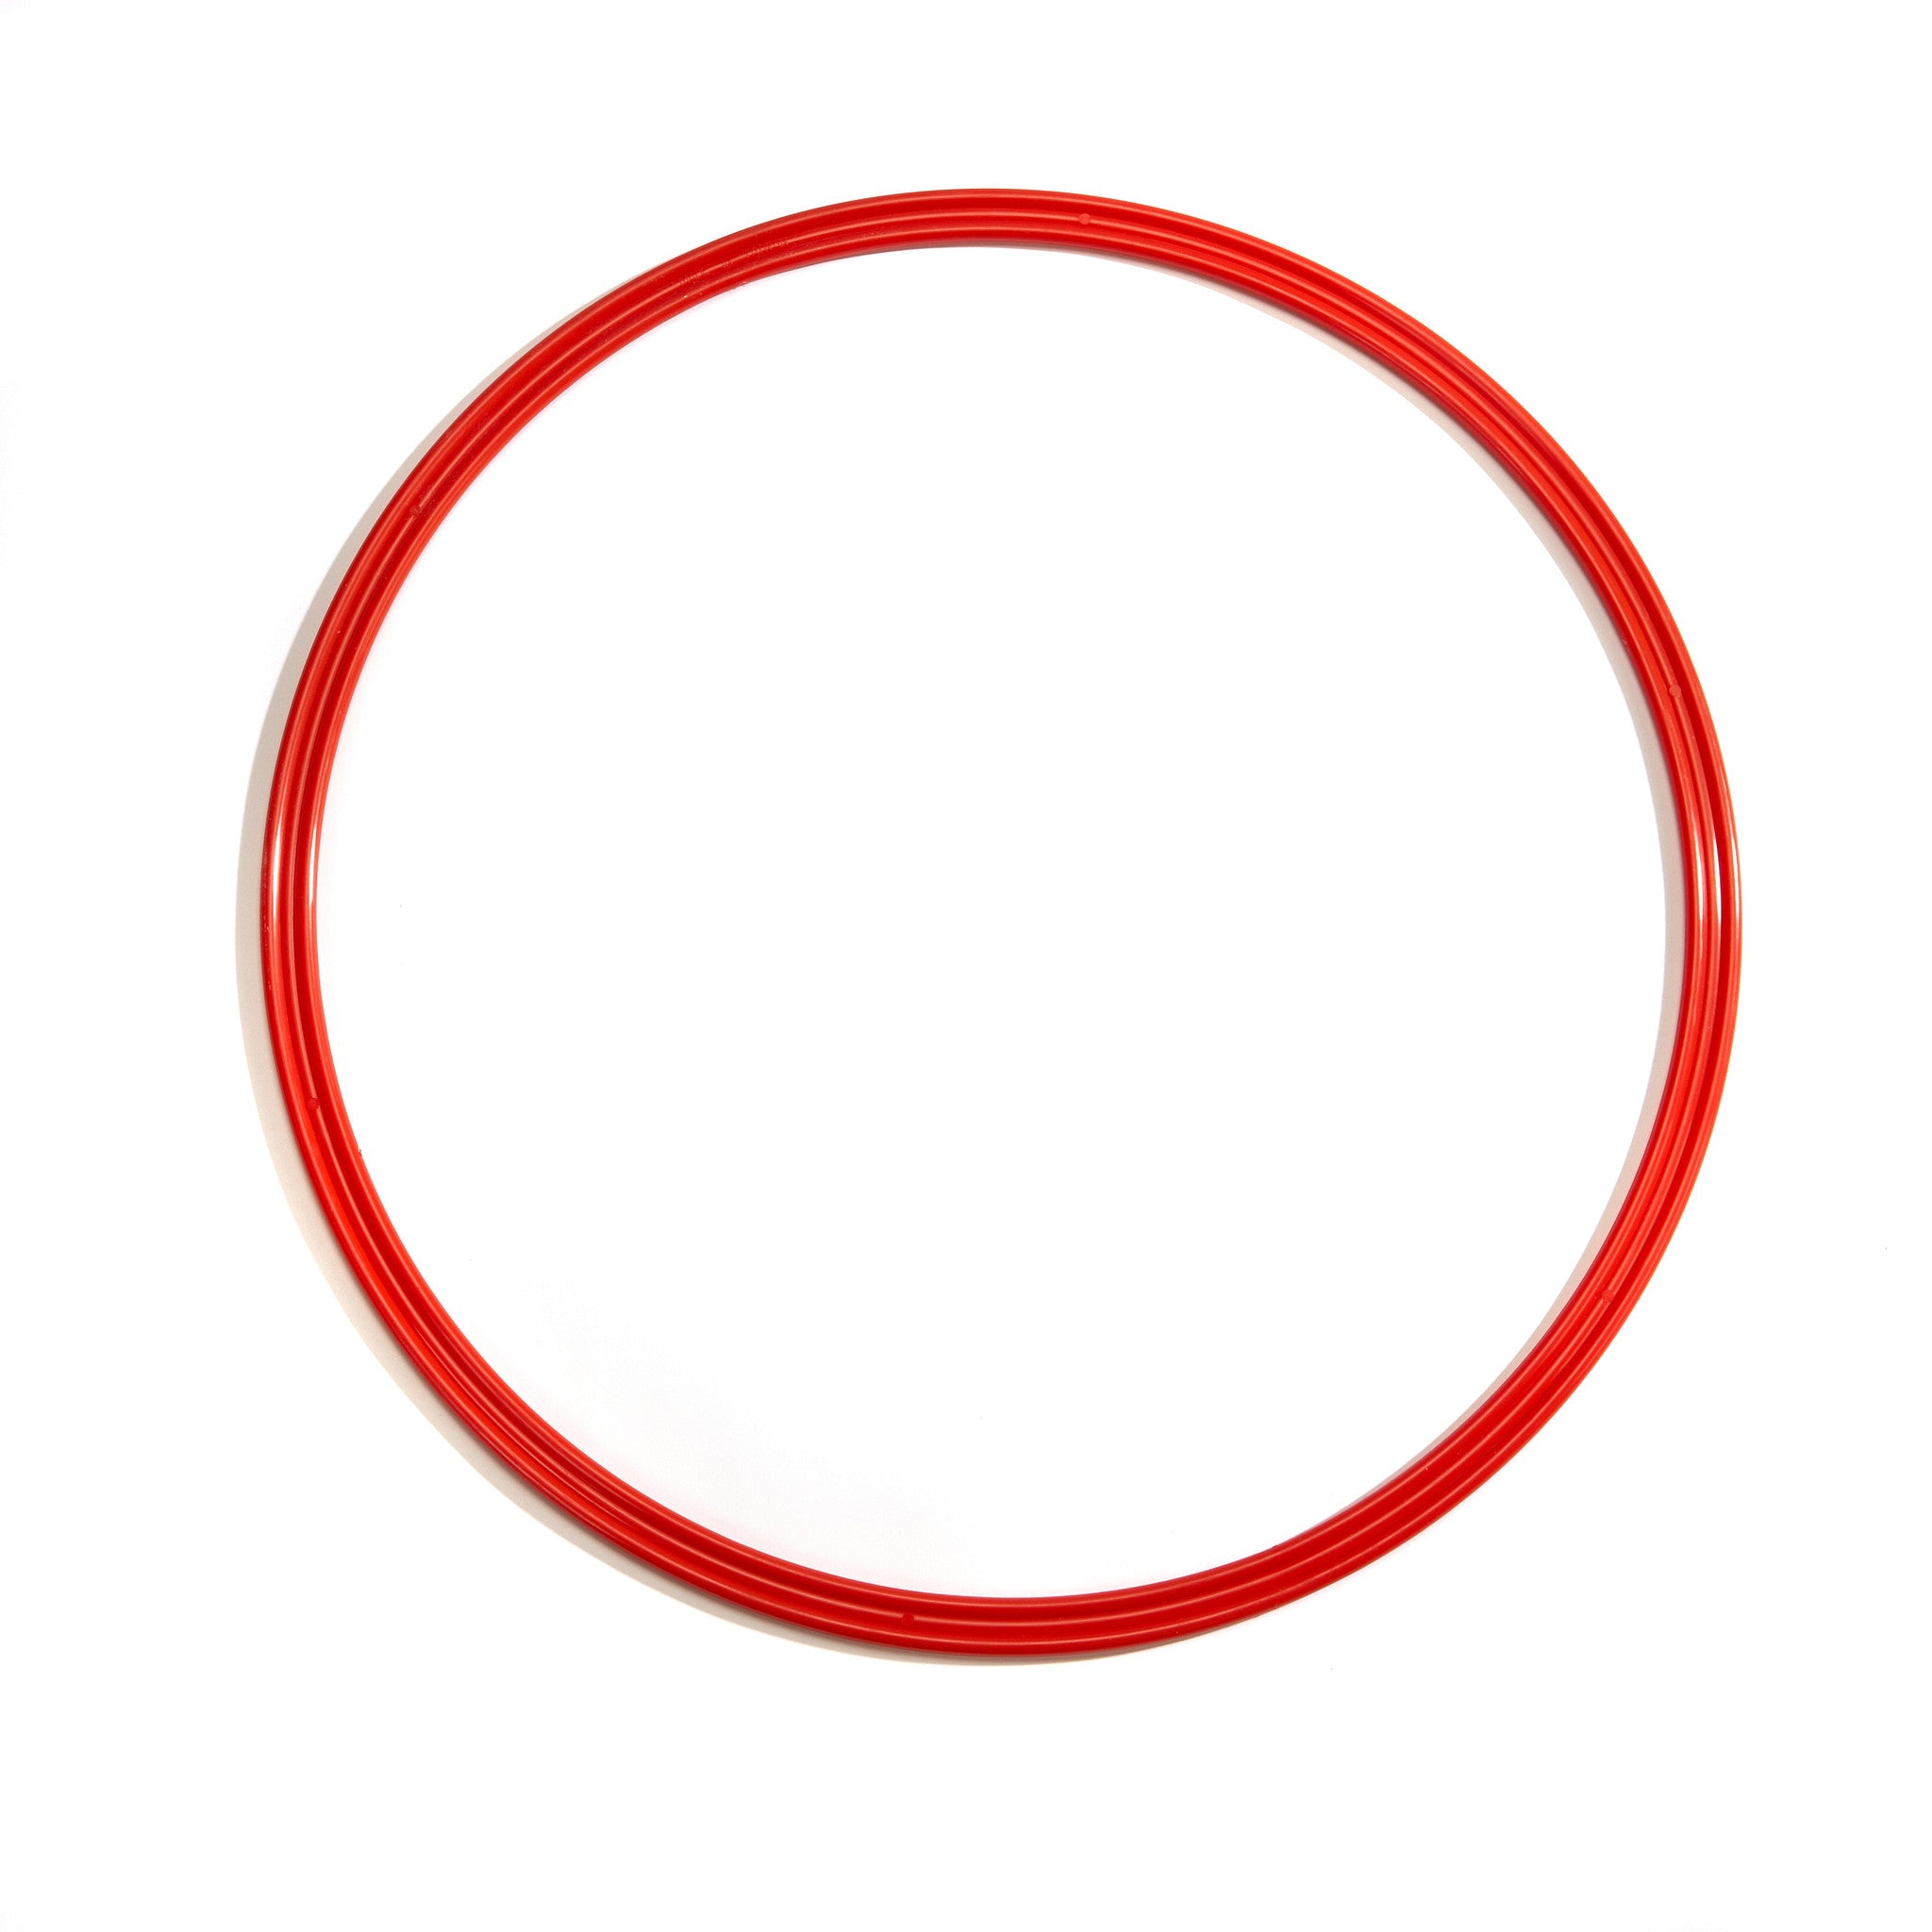 Large 50cm red flat hoop for sports coaching & training.